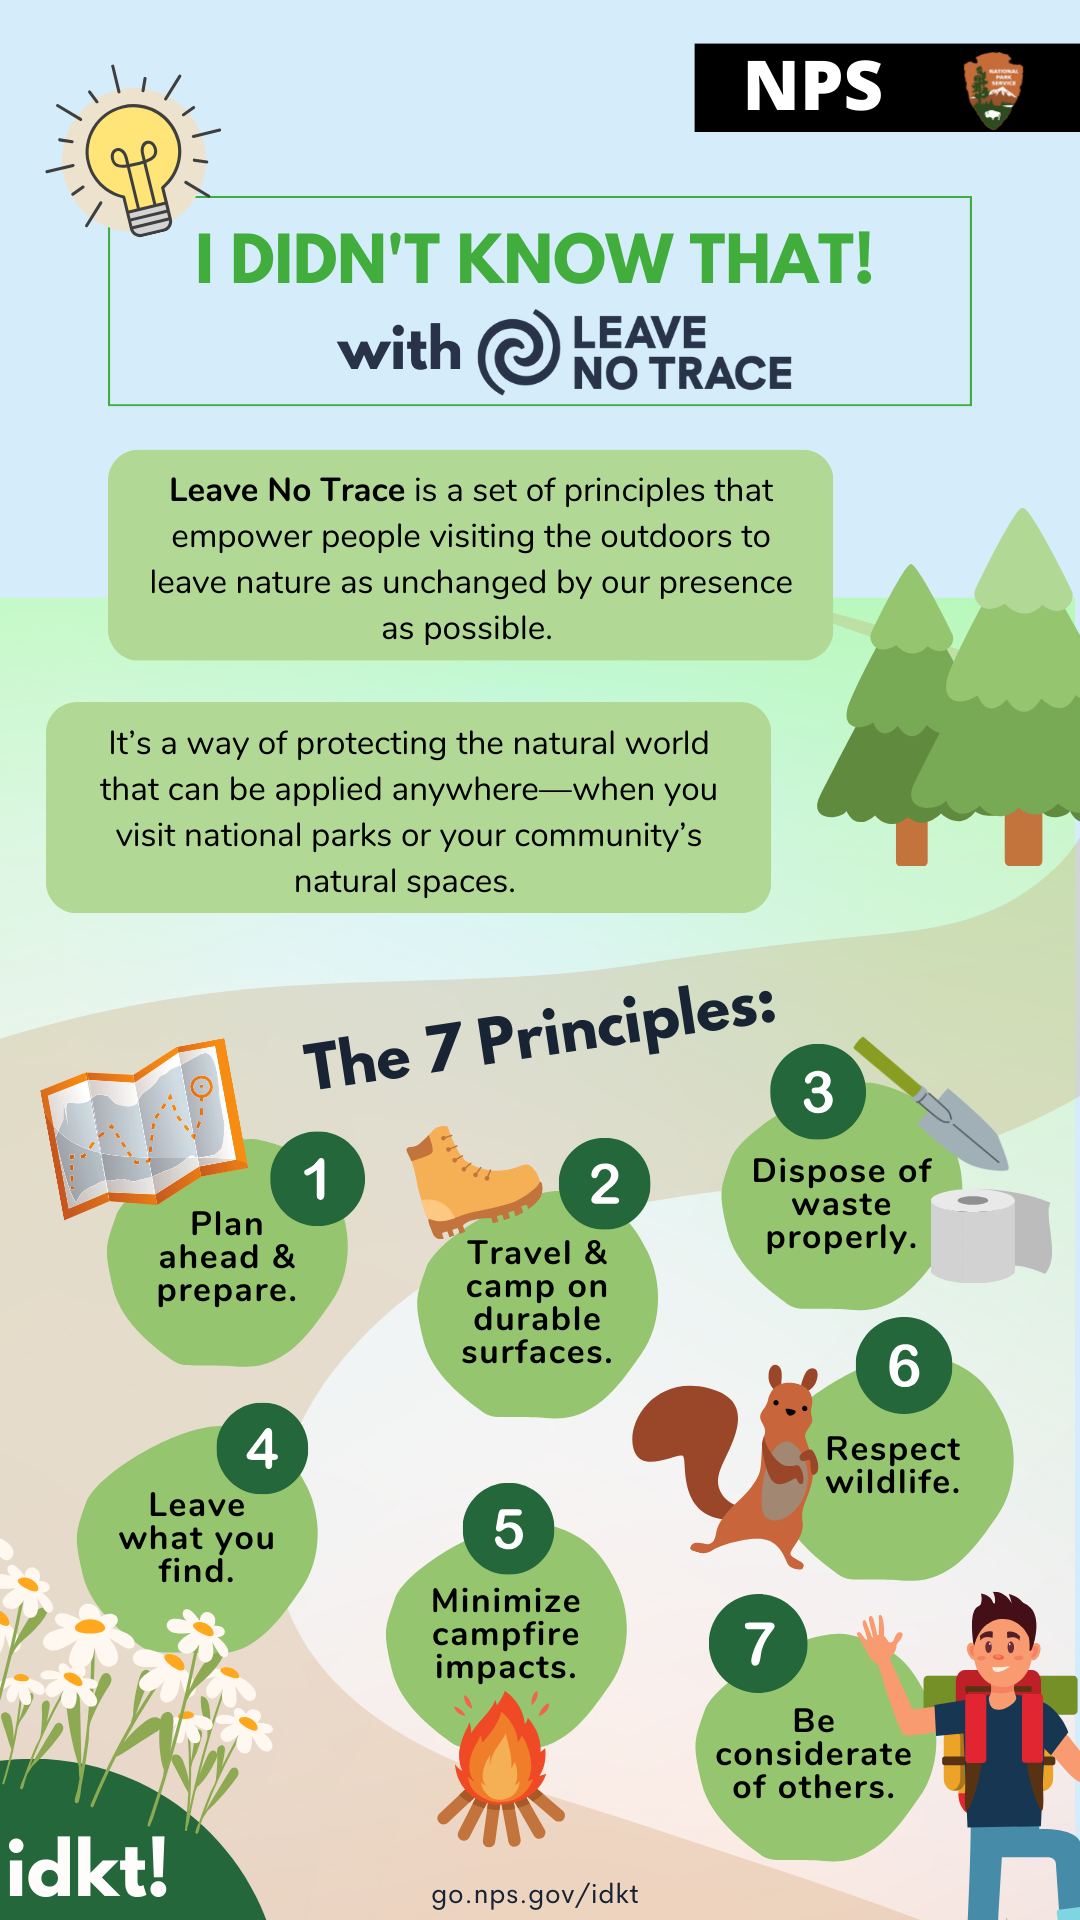 An infographic with title "I Didn't Know That! Leave No Trace" that explains Leave No Trace and lists the 7 principles. Full alt text available below the image.